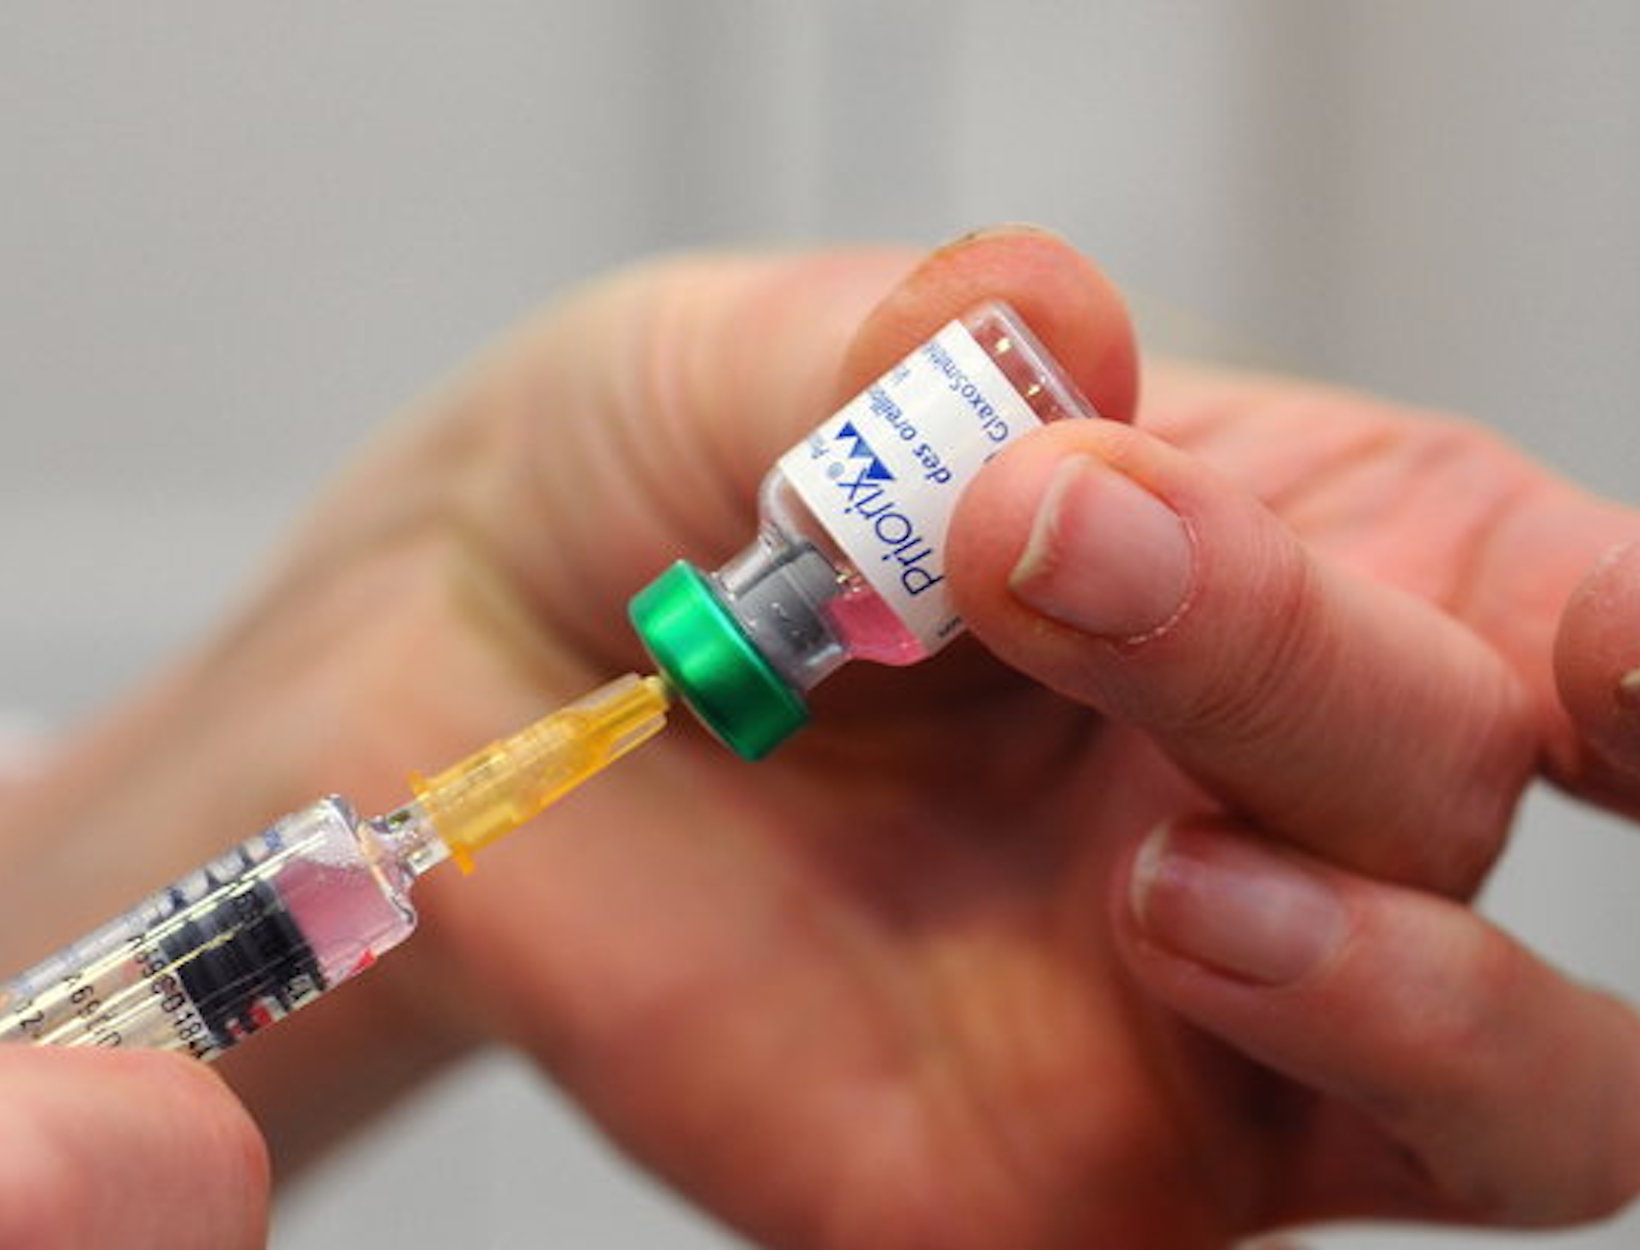 A Large Study Provides More Evidence That MMR Vaccines Don’t Cause Autism